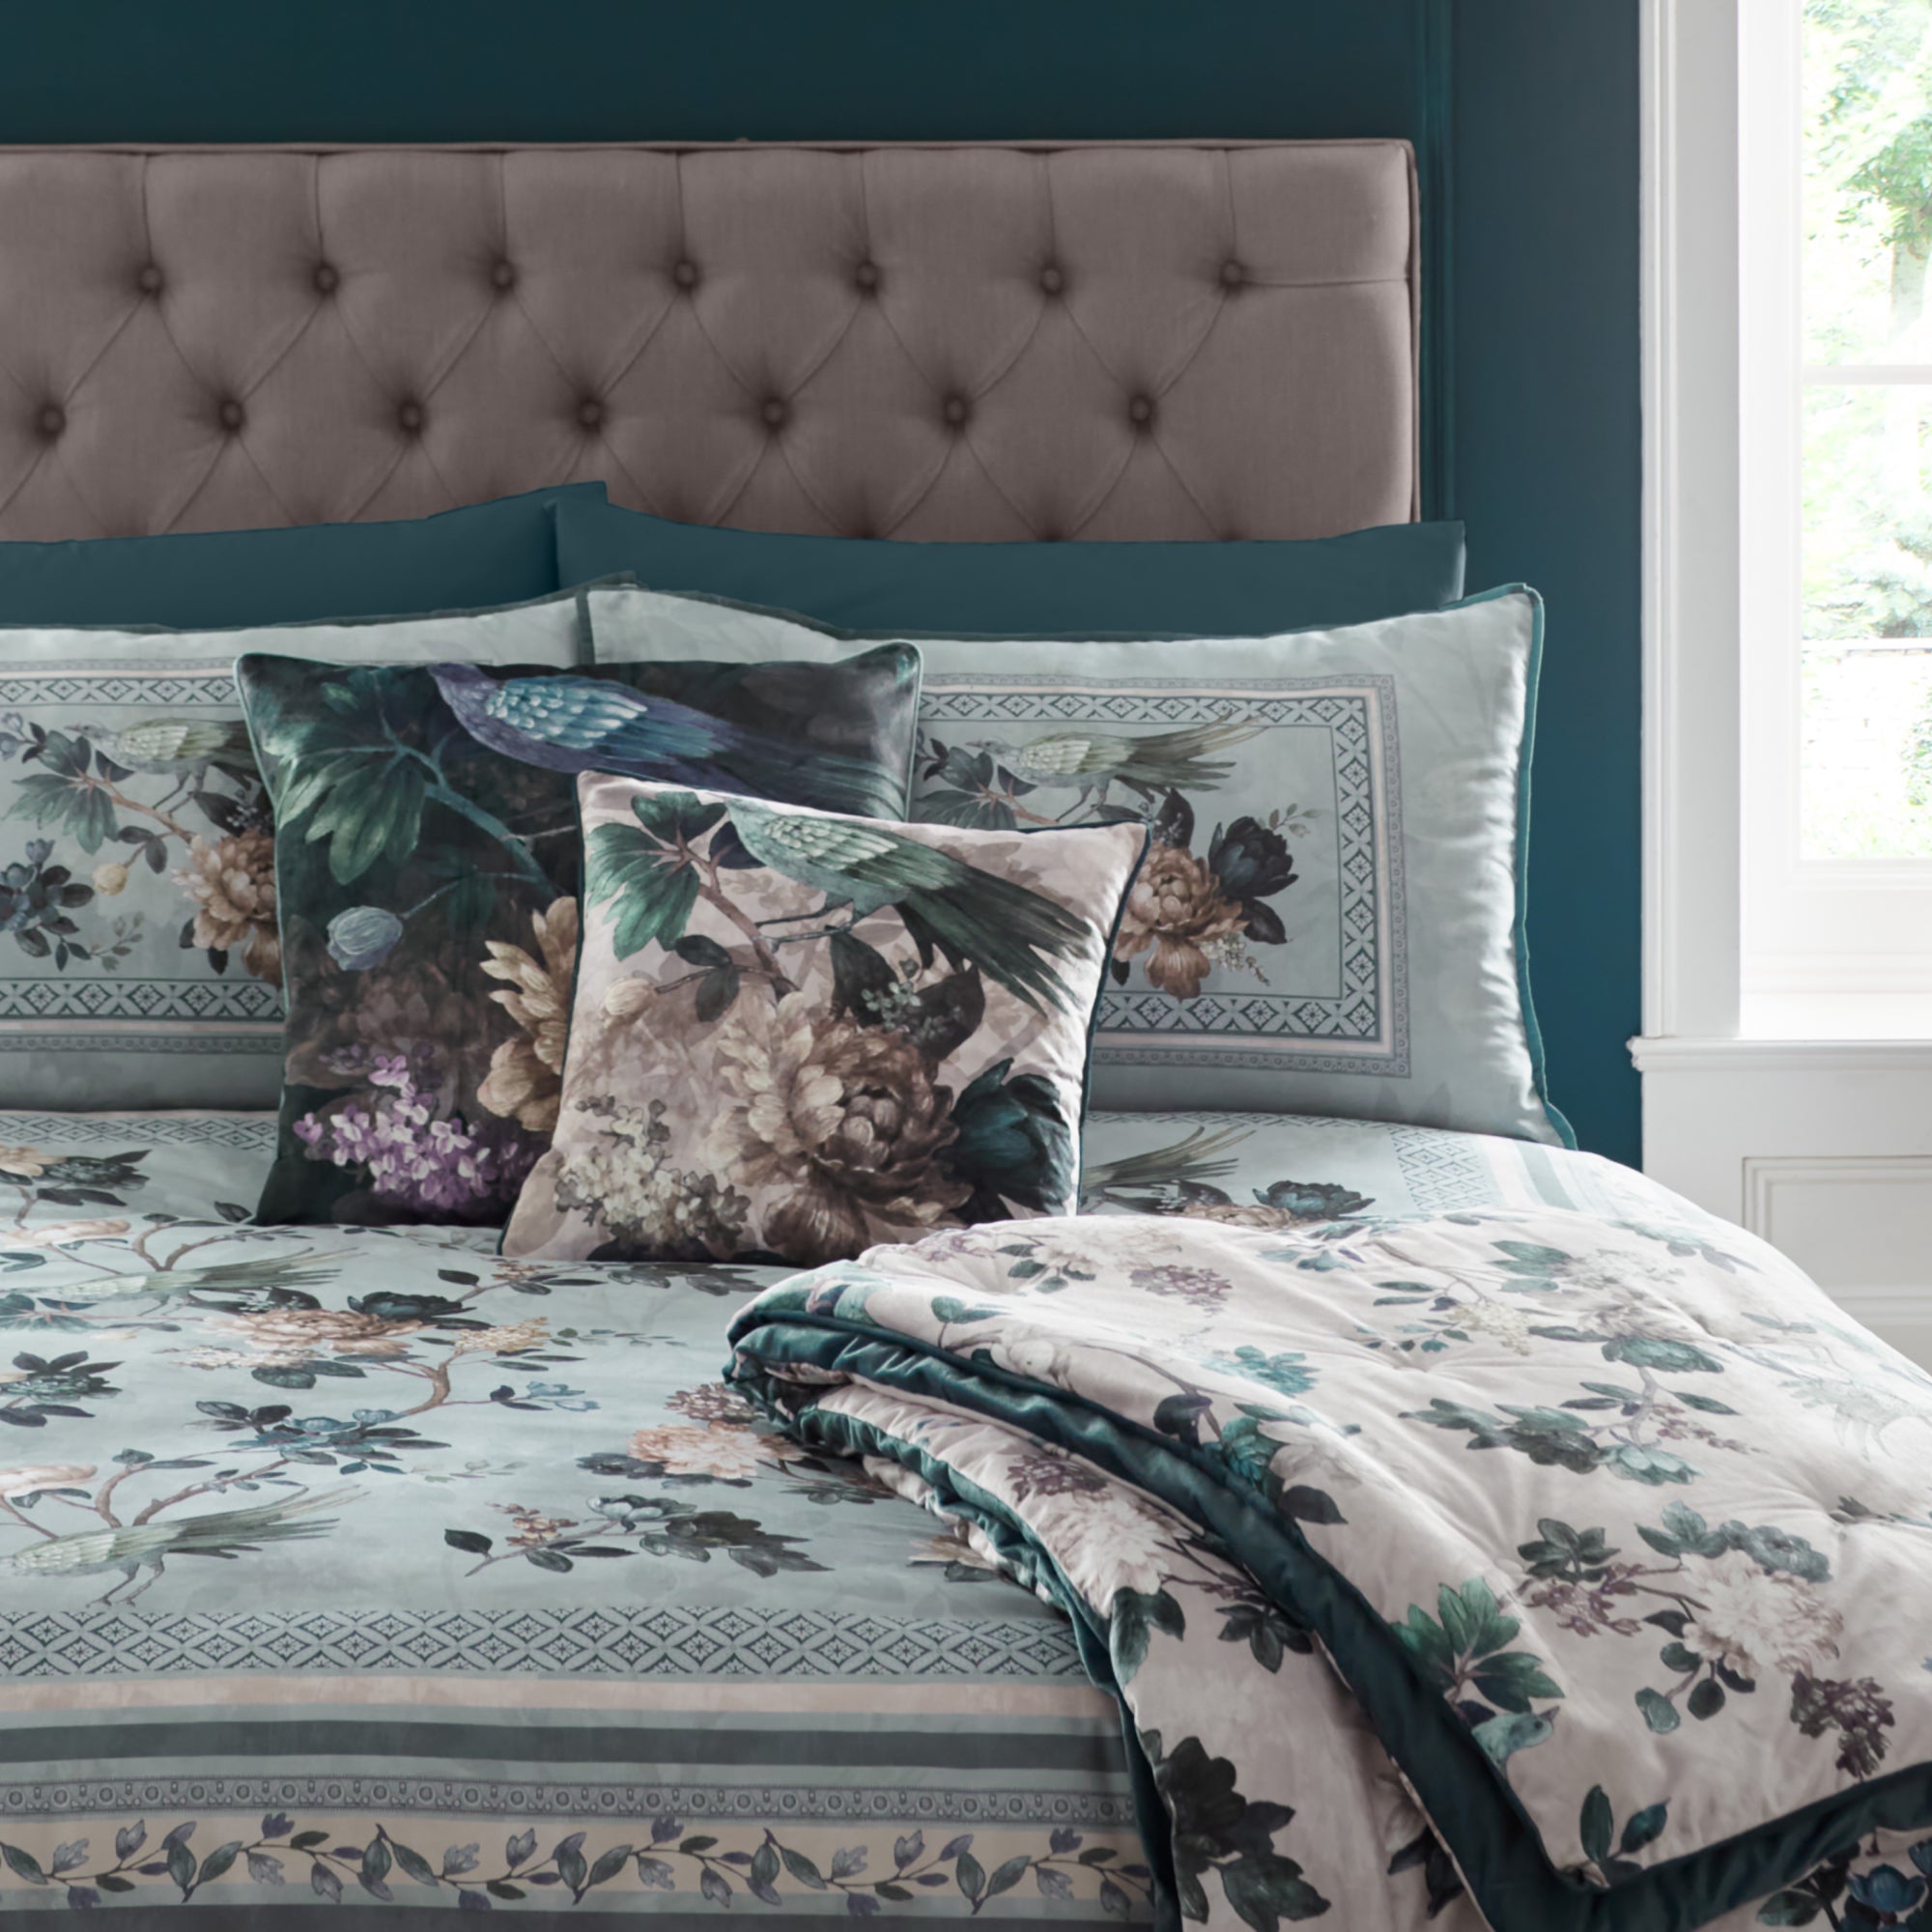 Windsford Duvet Cover Set by Appletree Heritage in Teal - Duvet Cover Set - Appletree Heritage